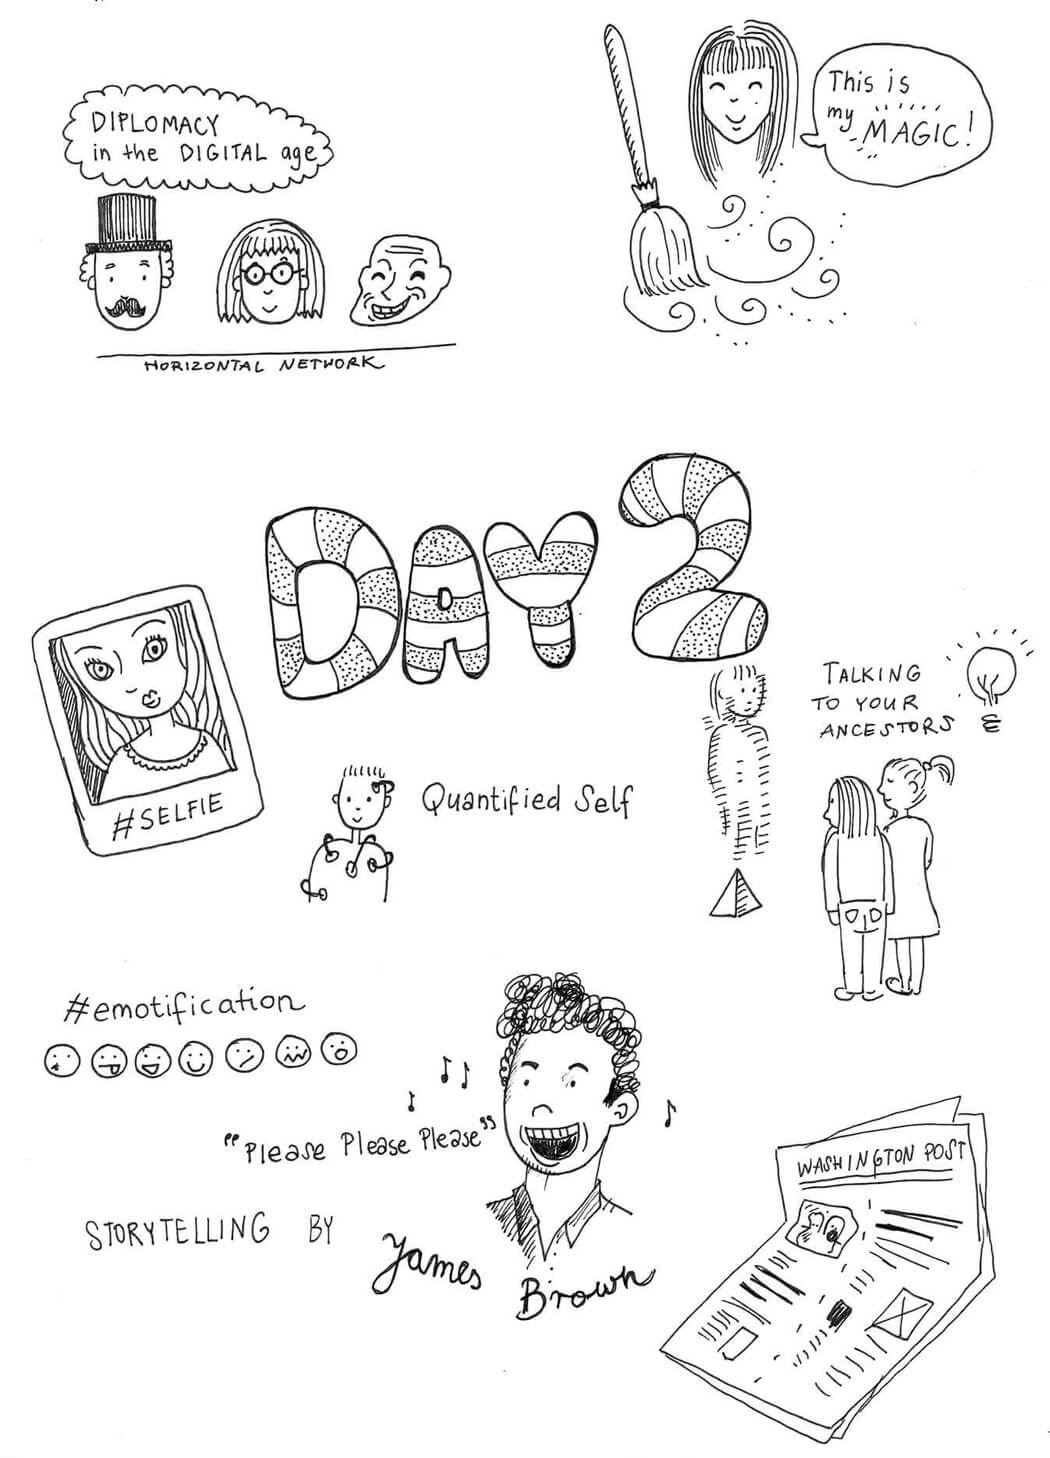 Illustrated notes from Web Summit Day 2